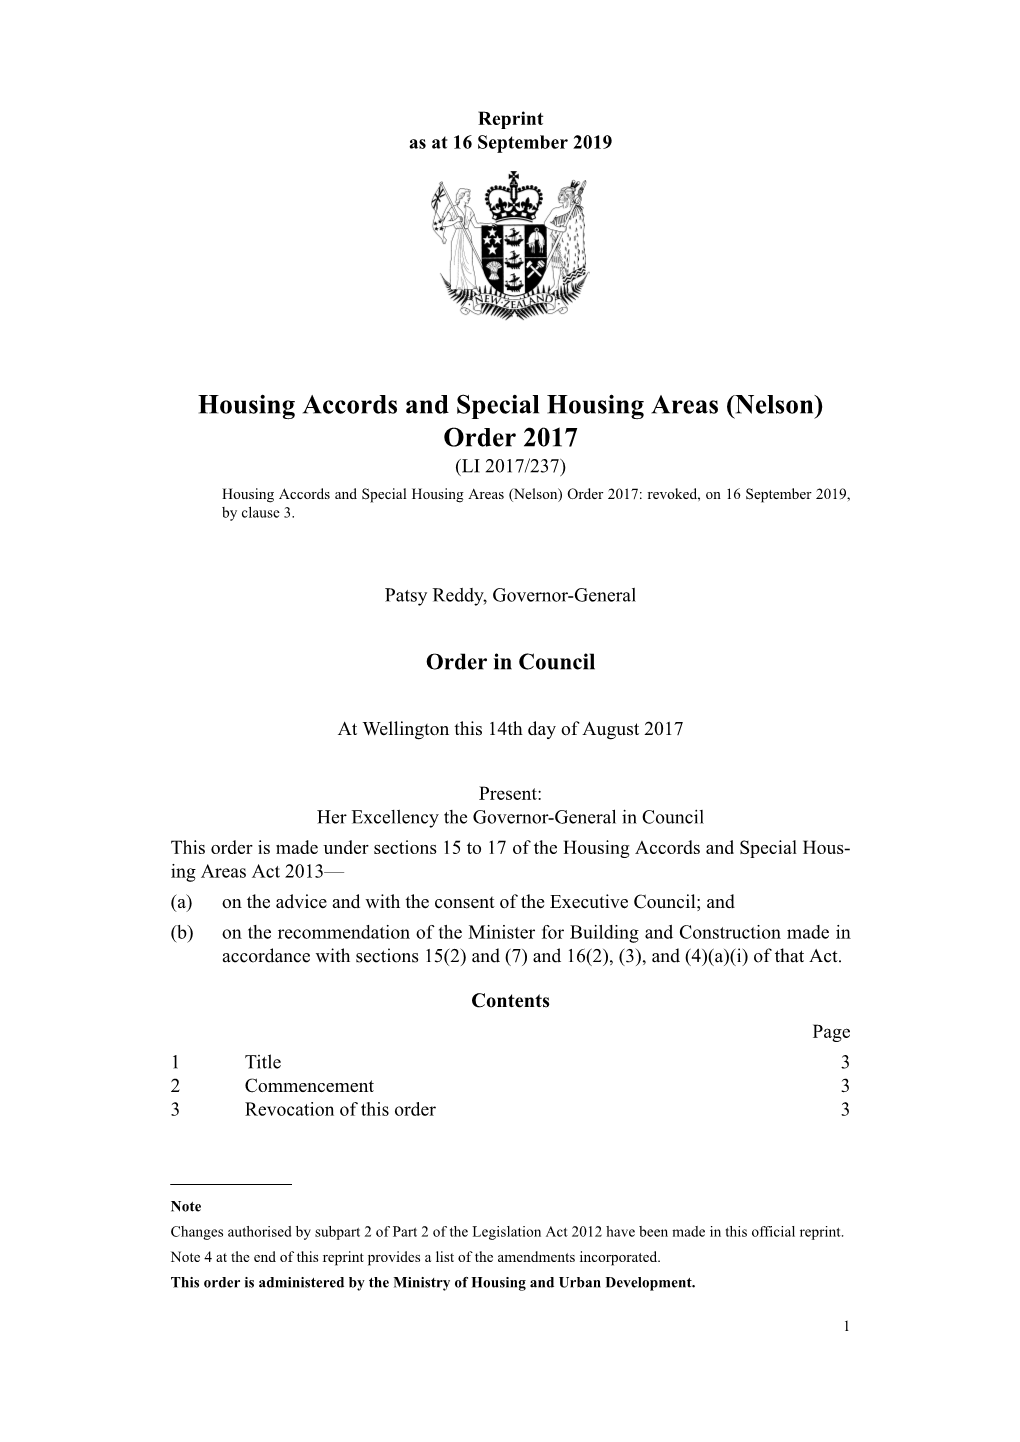 Housing Accords and Special Housing Areas (Nelson) Order 2017